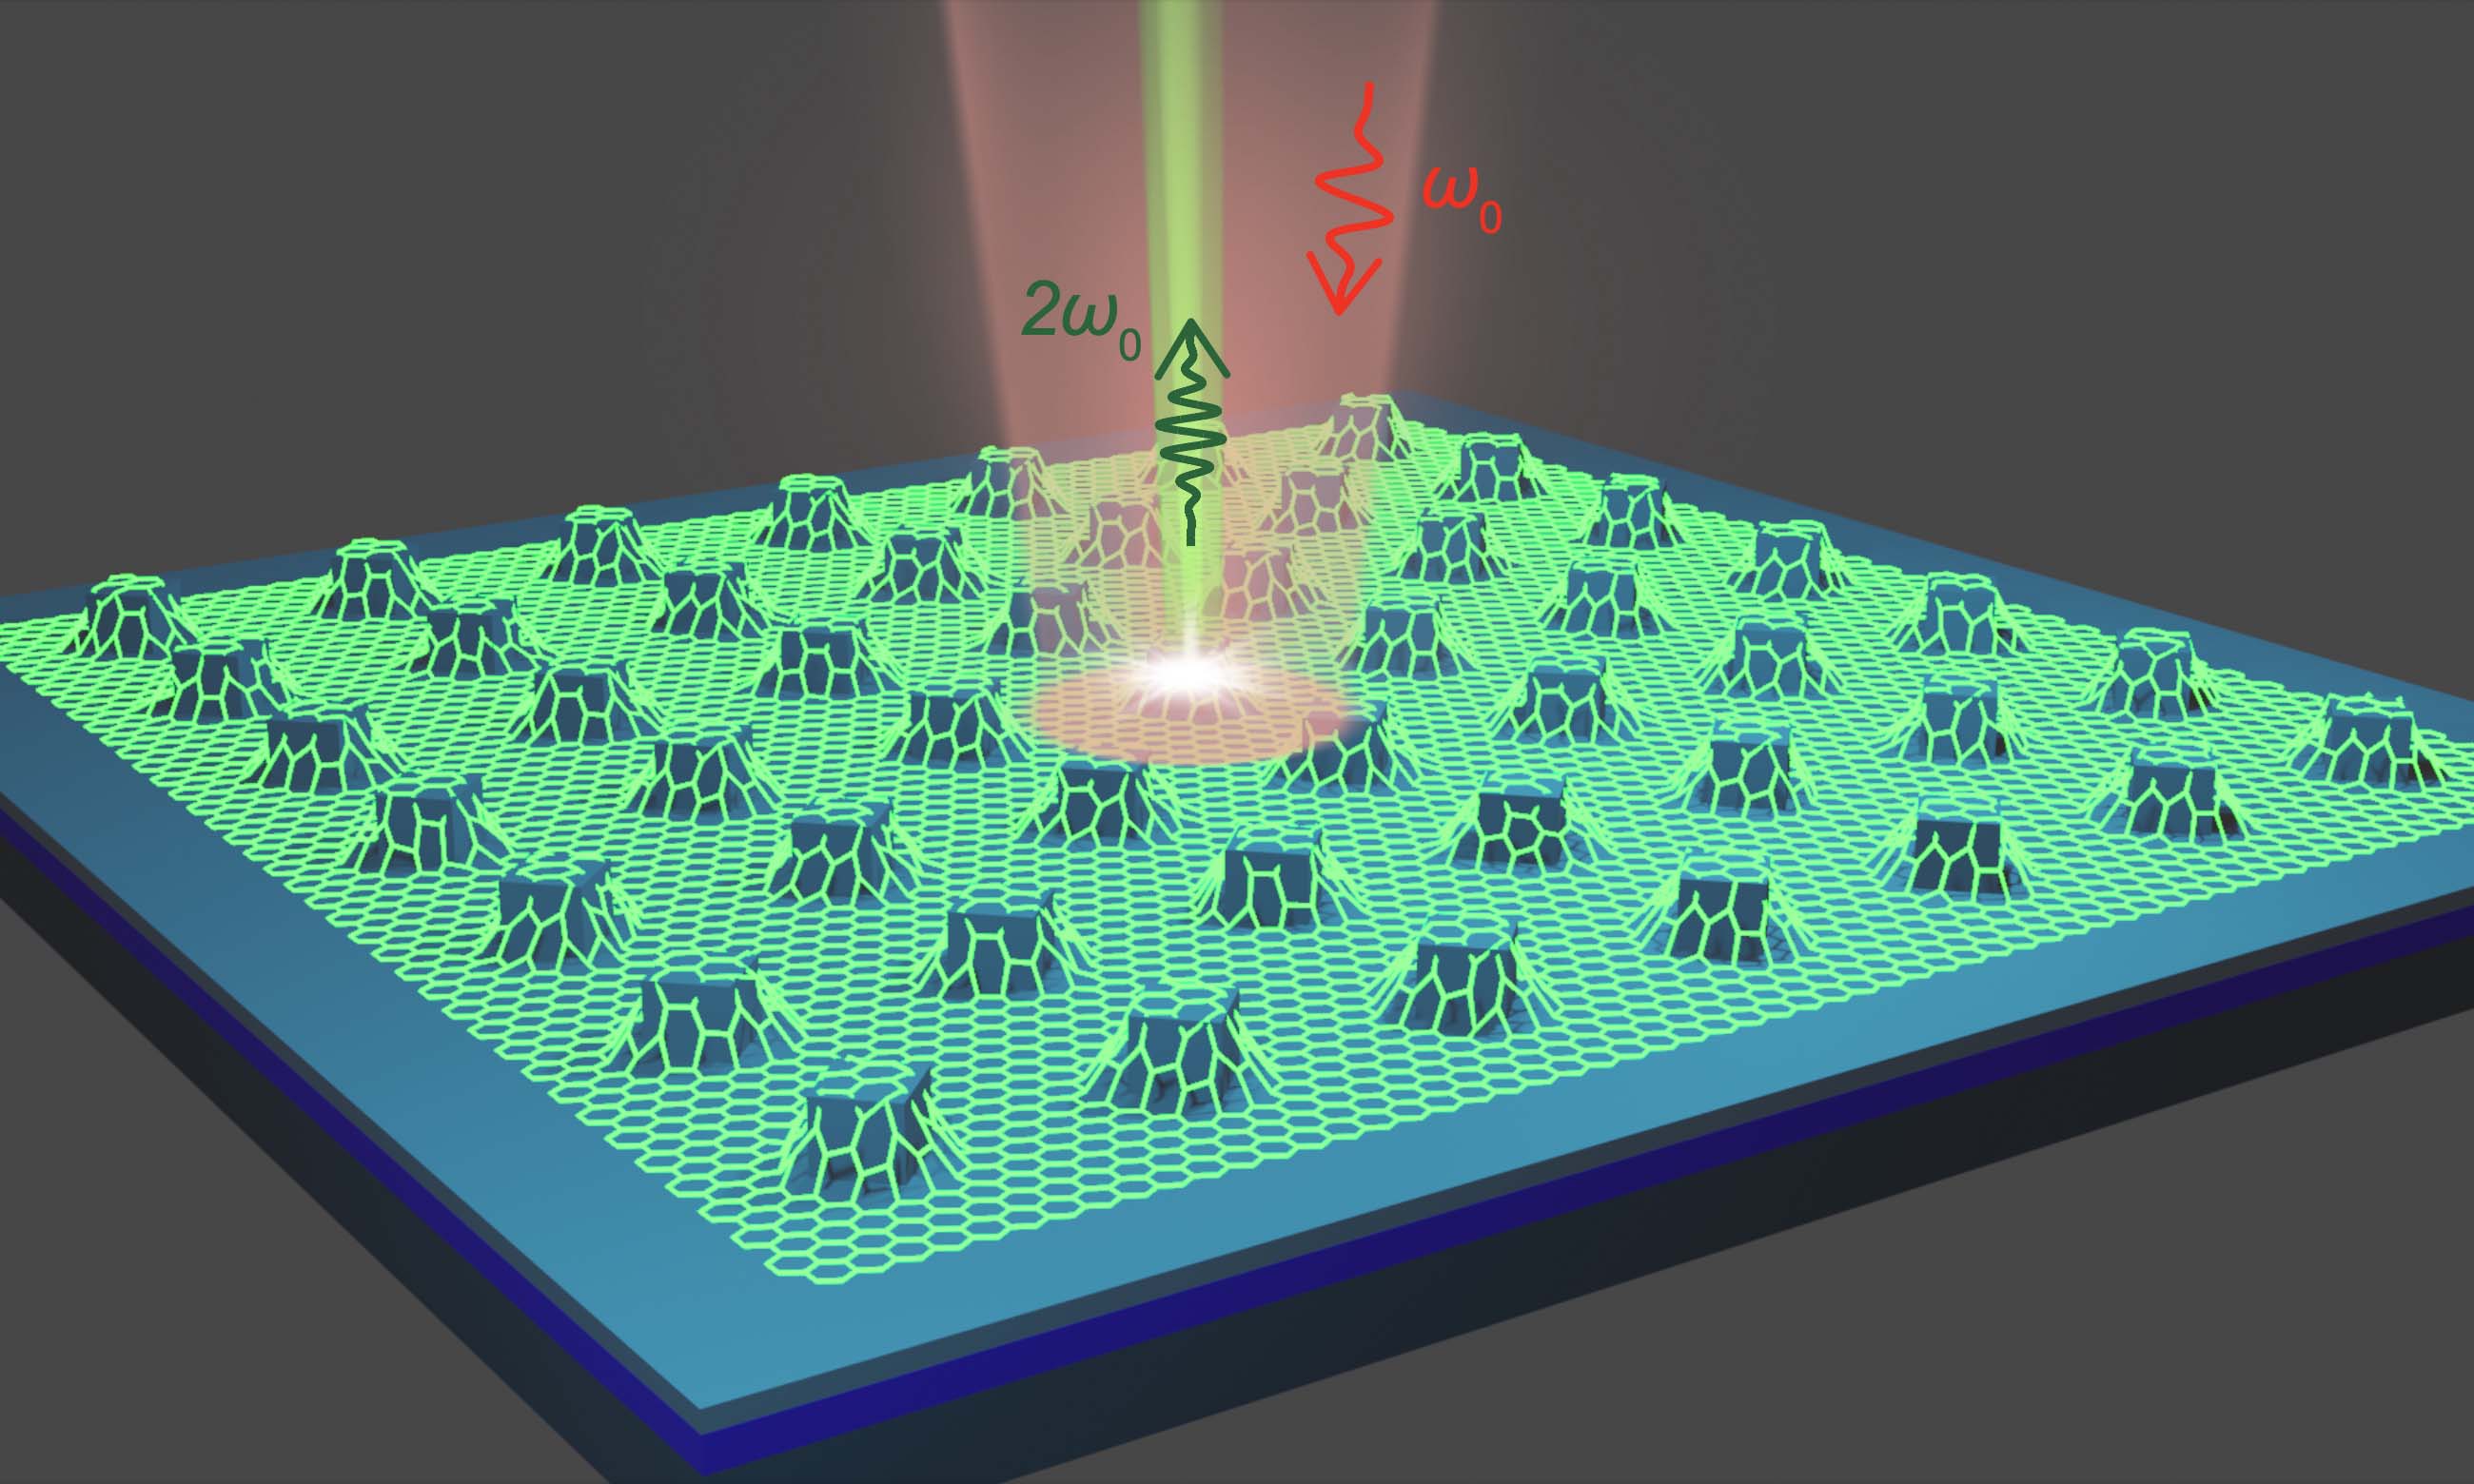 A light wave with twice the frequency of the incoming wave is generated when the graphene nanopillars are strained.